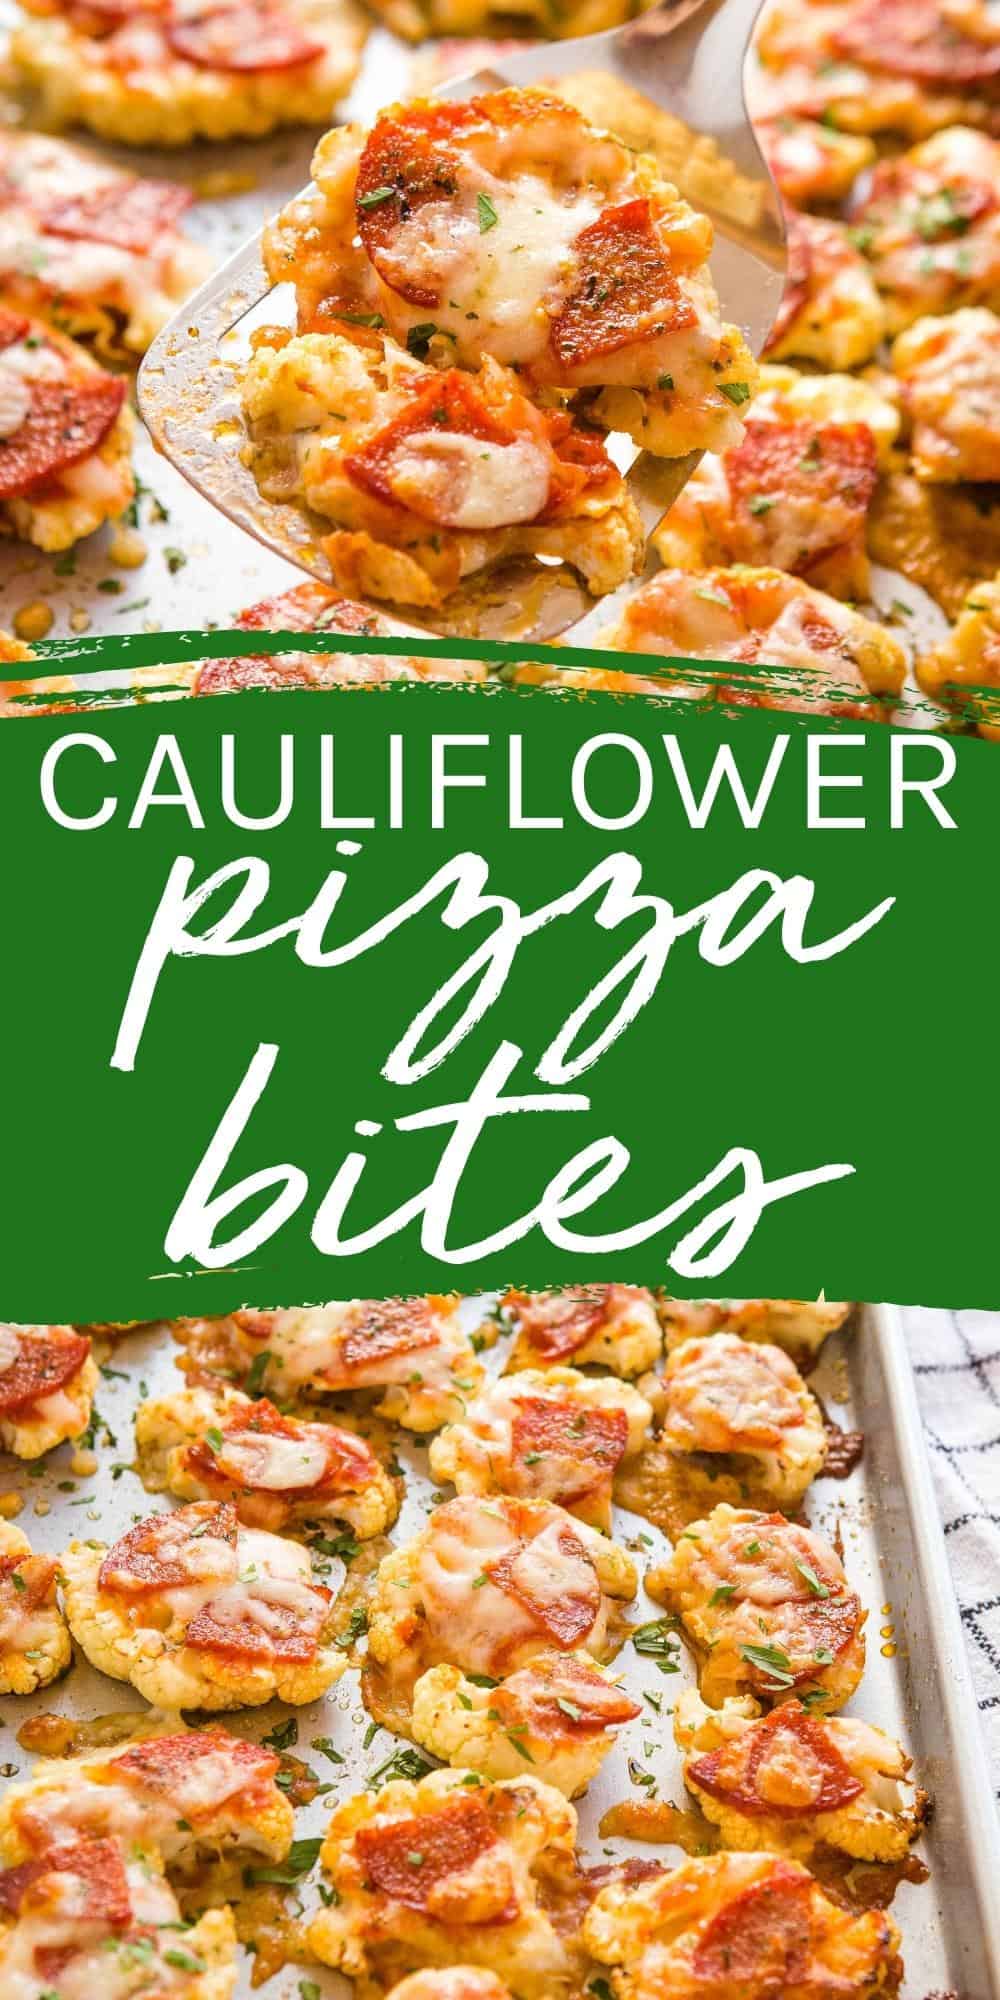 These Keto Pizza Bites with Cauliflower are the perfect easy-to-make low-carb comfort food meal that's packed with the best pizza flavours. Ready in 25 minutes! Recipe from thebusybaker.ca! #ketopizza #lowcarb #pizzabites #appetizer #dinner #comfortfood #easyketomeal #easymeal via @busybakerblog